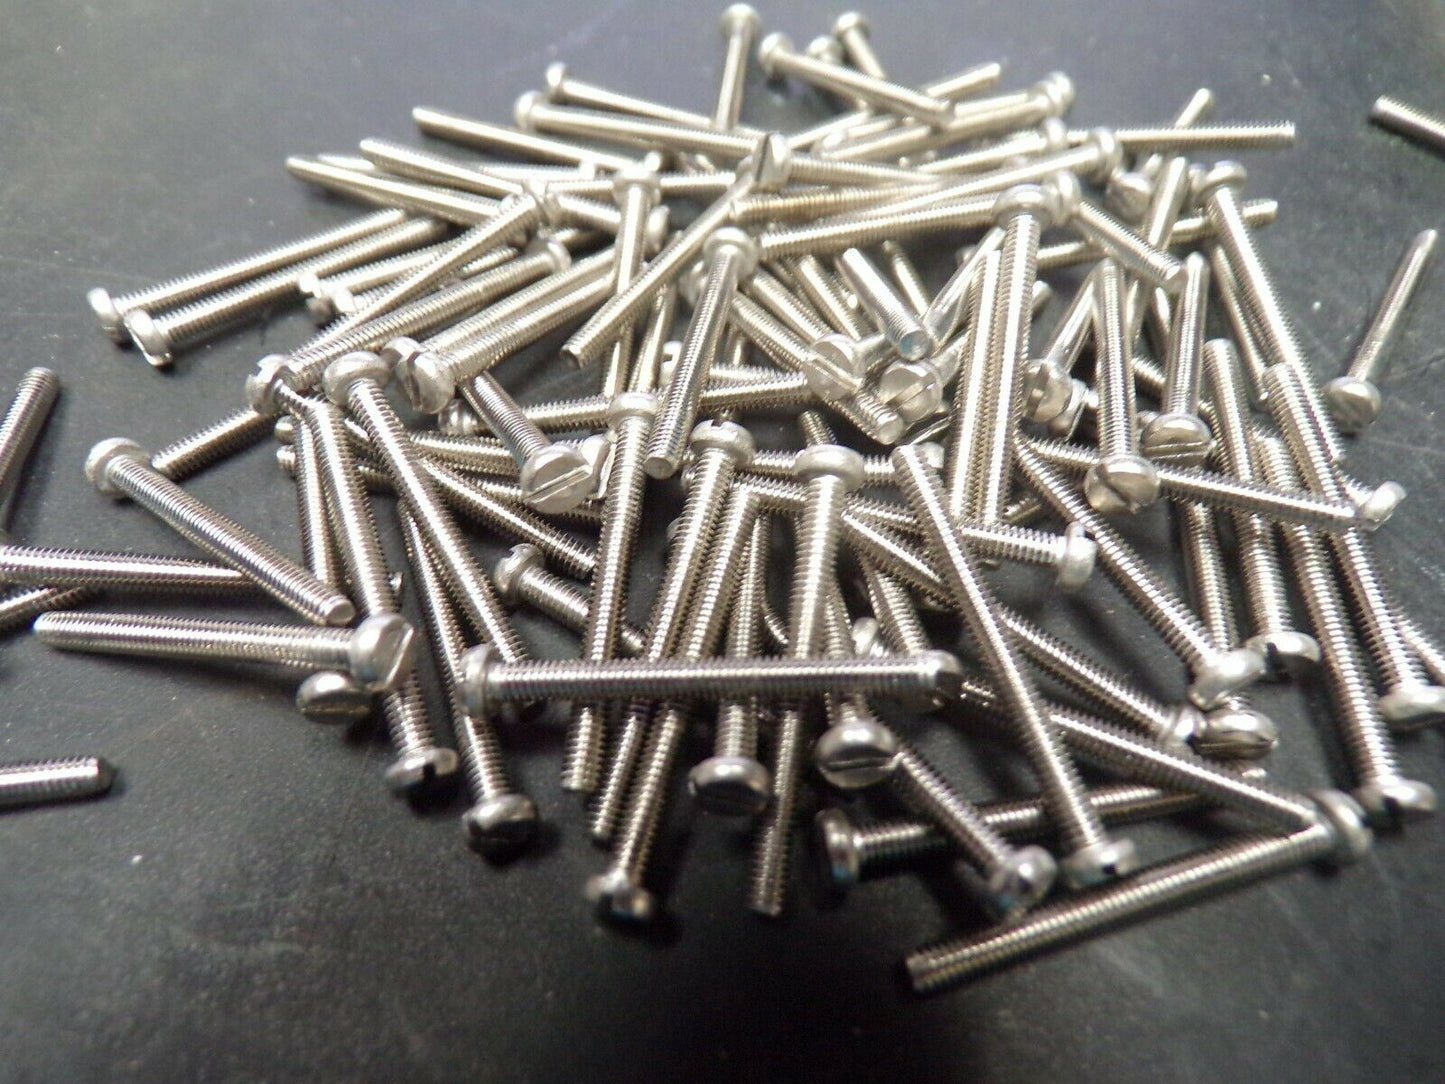 (100) FABORY M2.5-0.45 x 25mm Machine Screw, Cheese, Slotted, A2 SS, Plain, 6HY94 (184478748174-BT20(A))